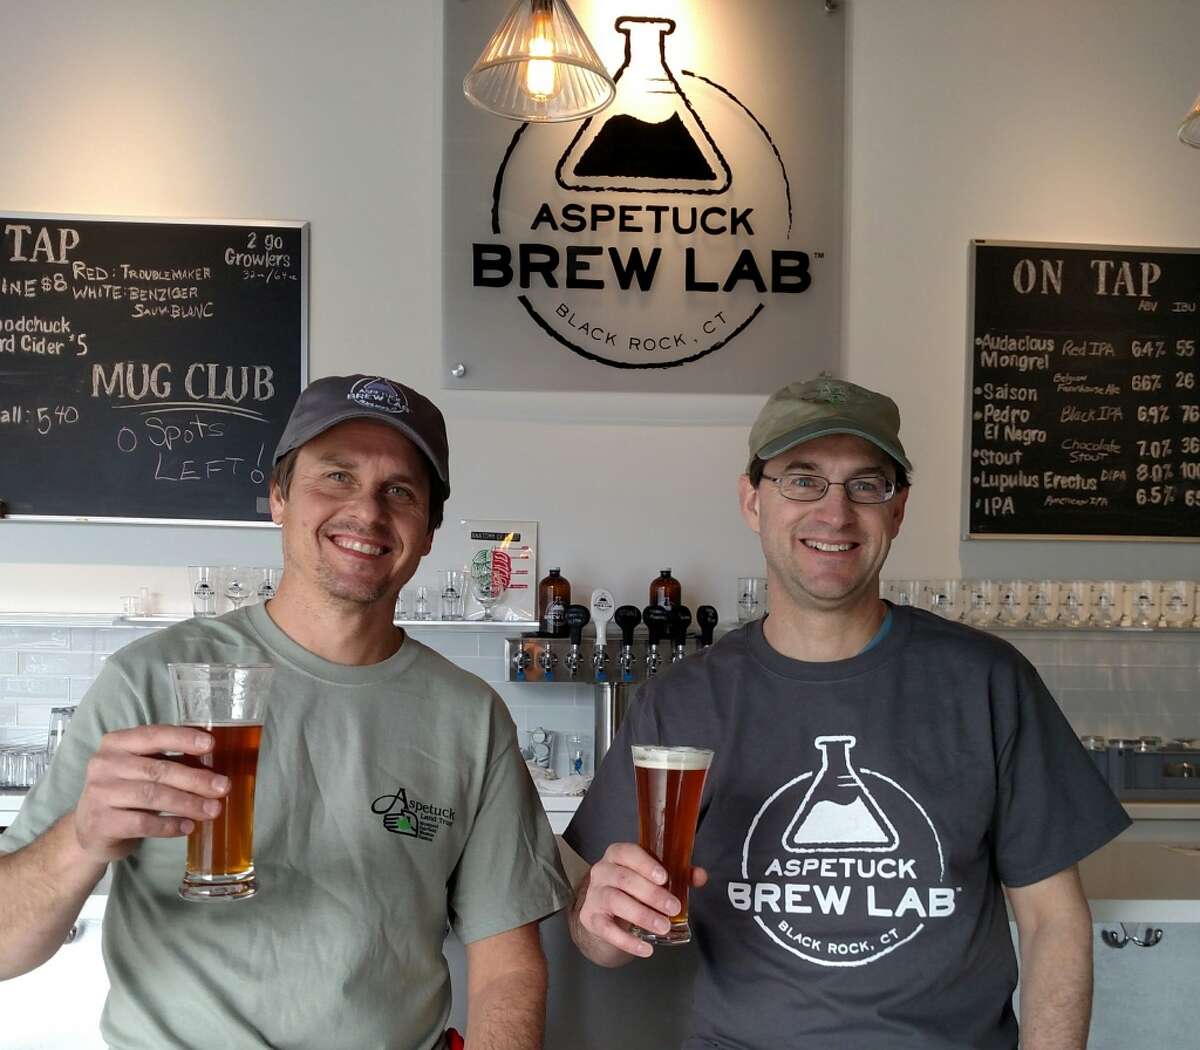 Newly opened Aspetuck Brew Lab, located in Bridgeport, is partnering with the Aspetuck Land Trust in recognition of Earth Day on Friday they’ll donate $1 for every pint sold and $2 for every 64oz growler sold to the trust. Find out more.